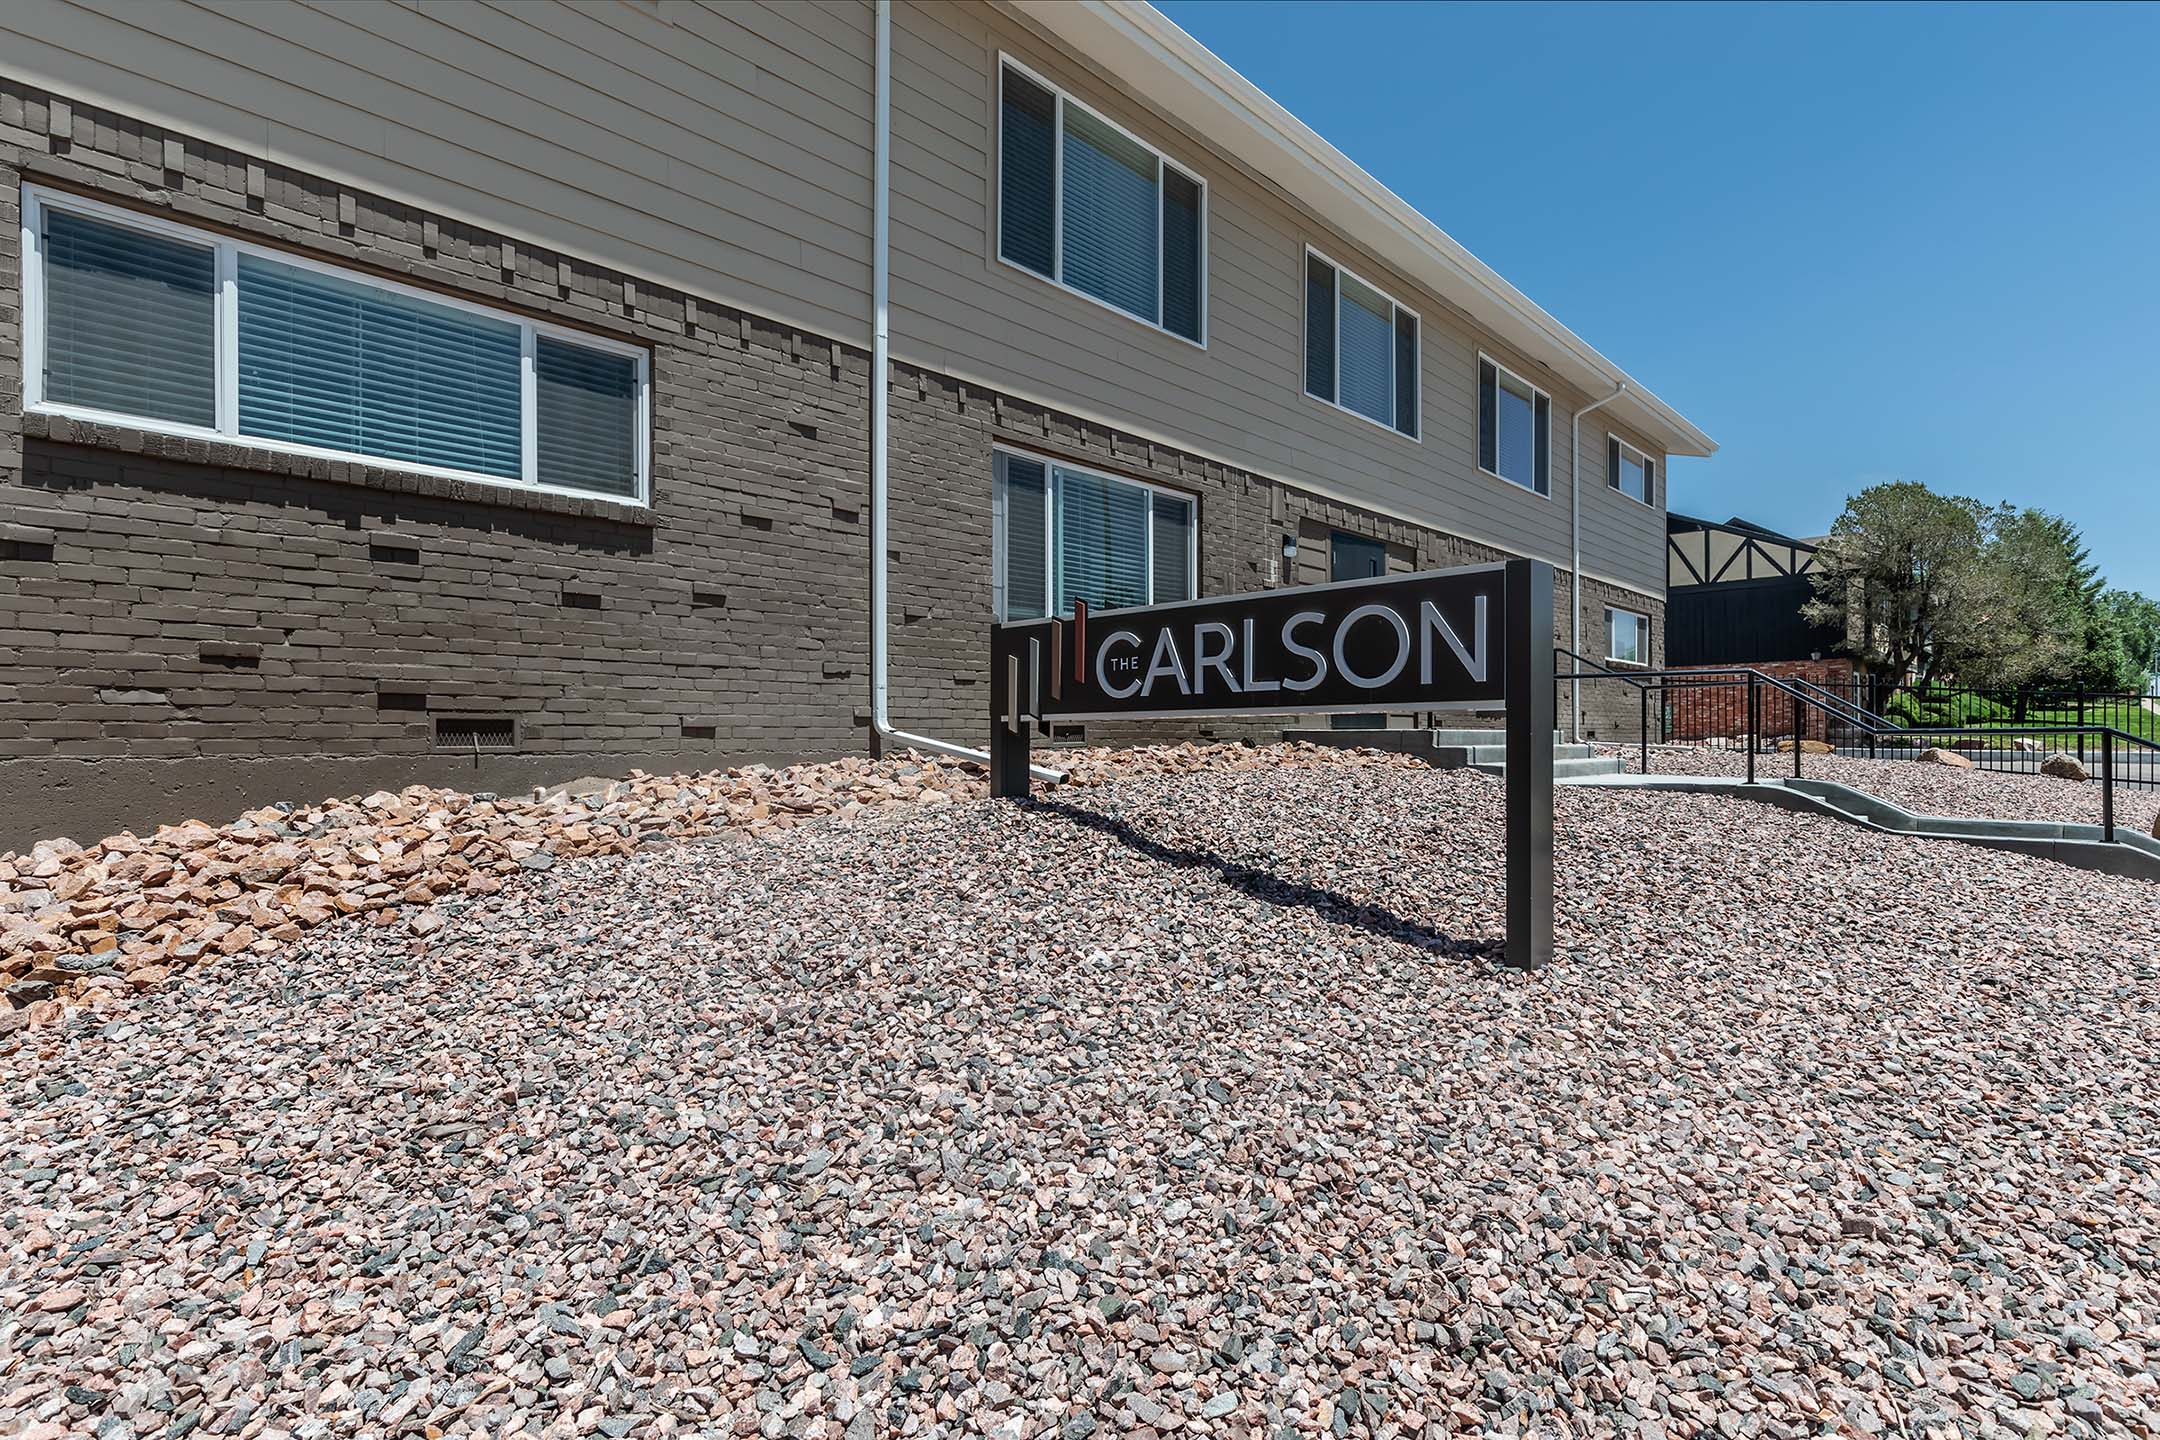 Signage of The Carlson in Colorado Springs, CO